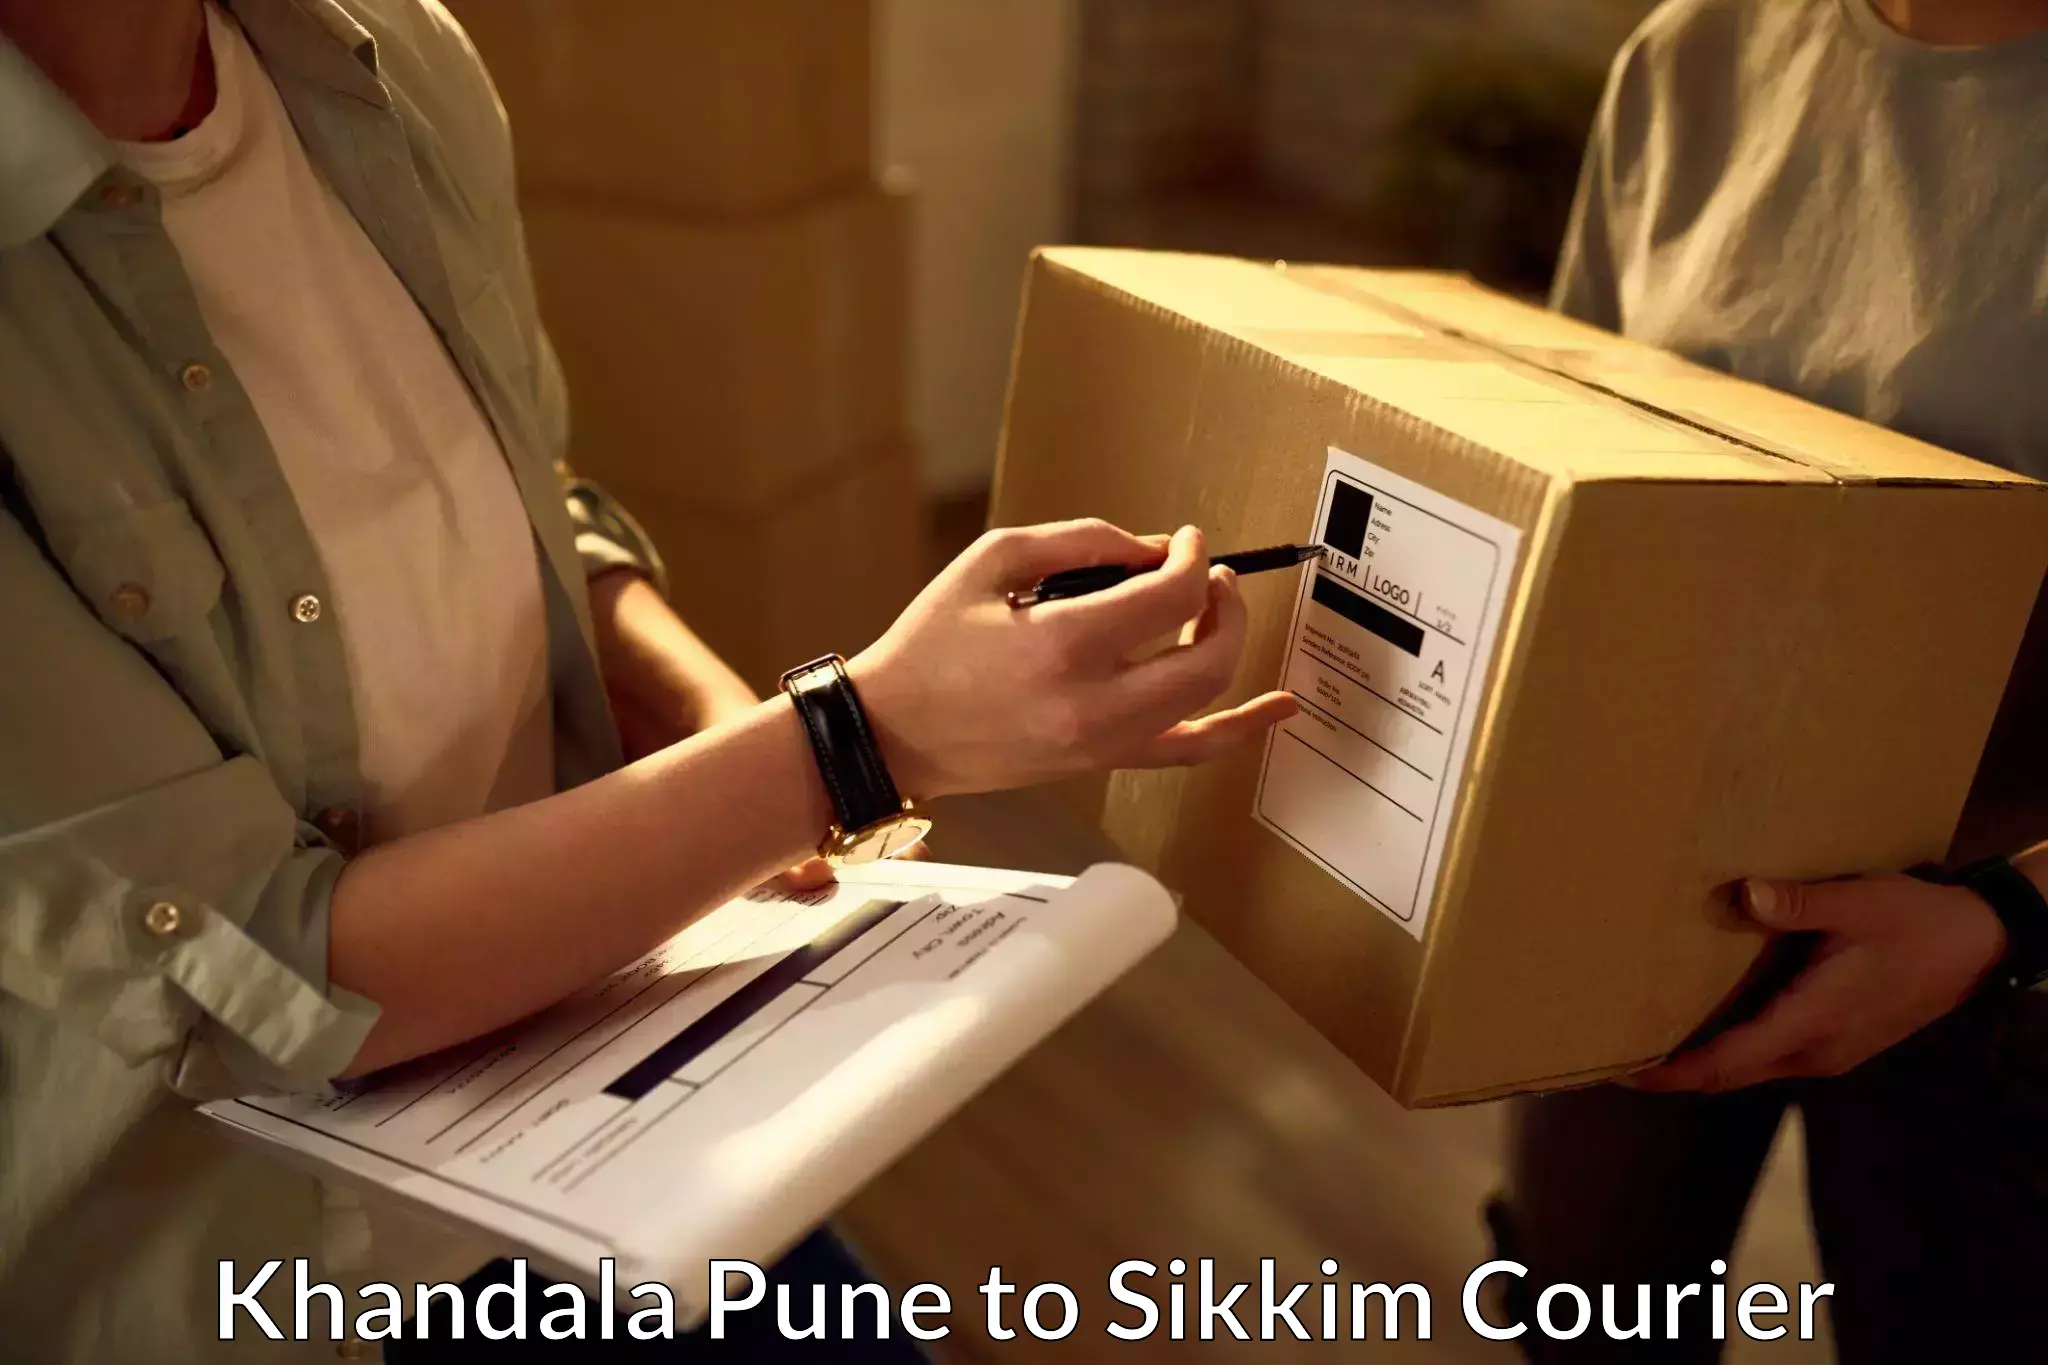 State-of-the-art courier technology Khandala Pune to South Sikkim